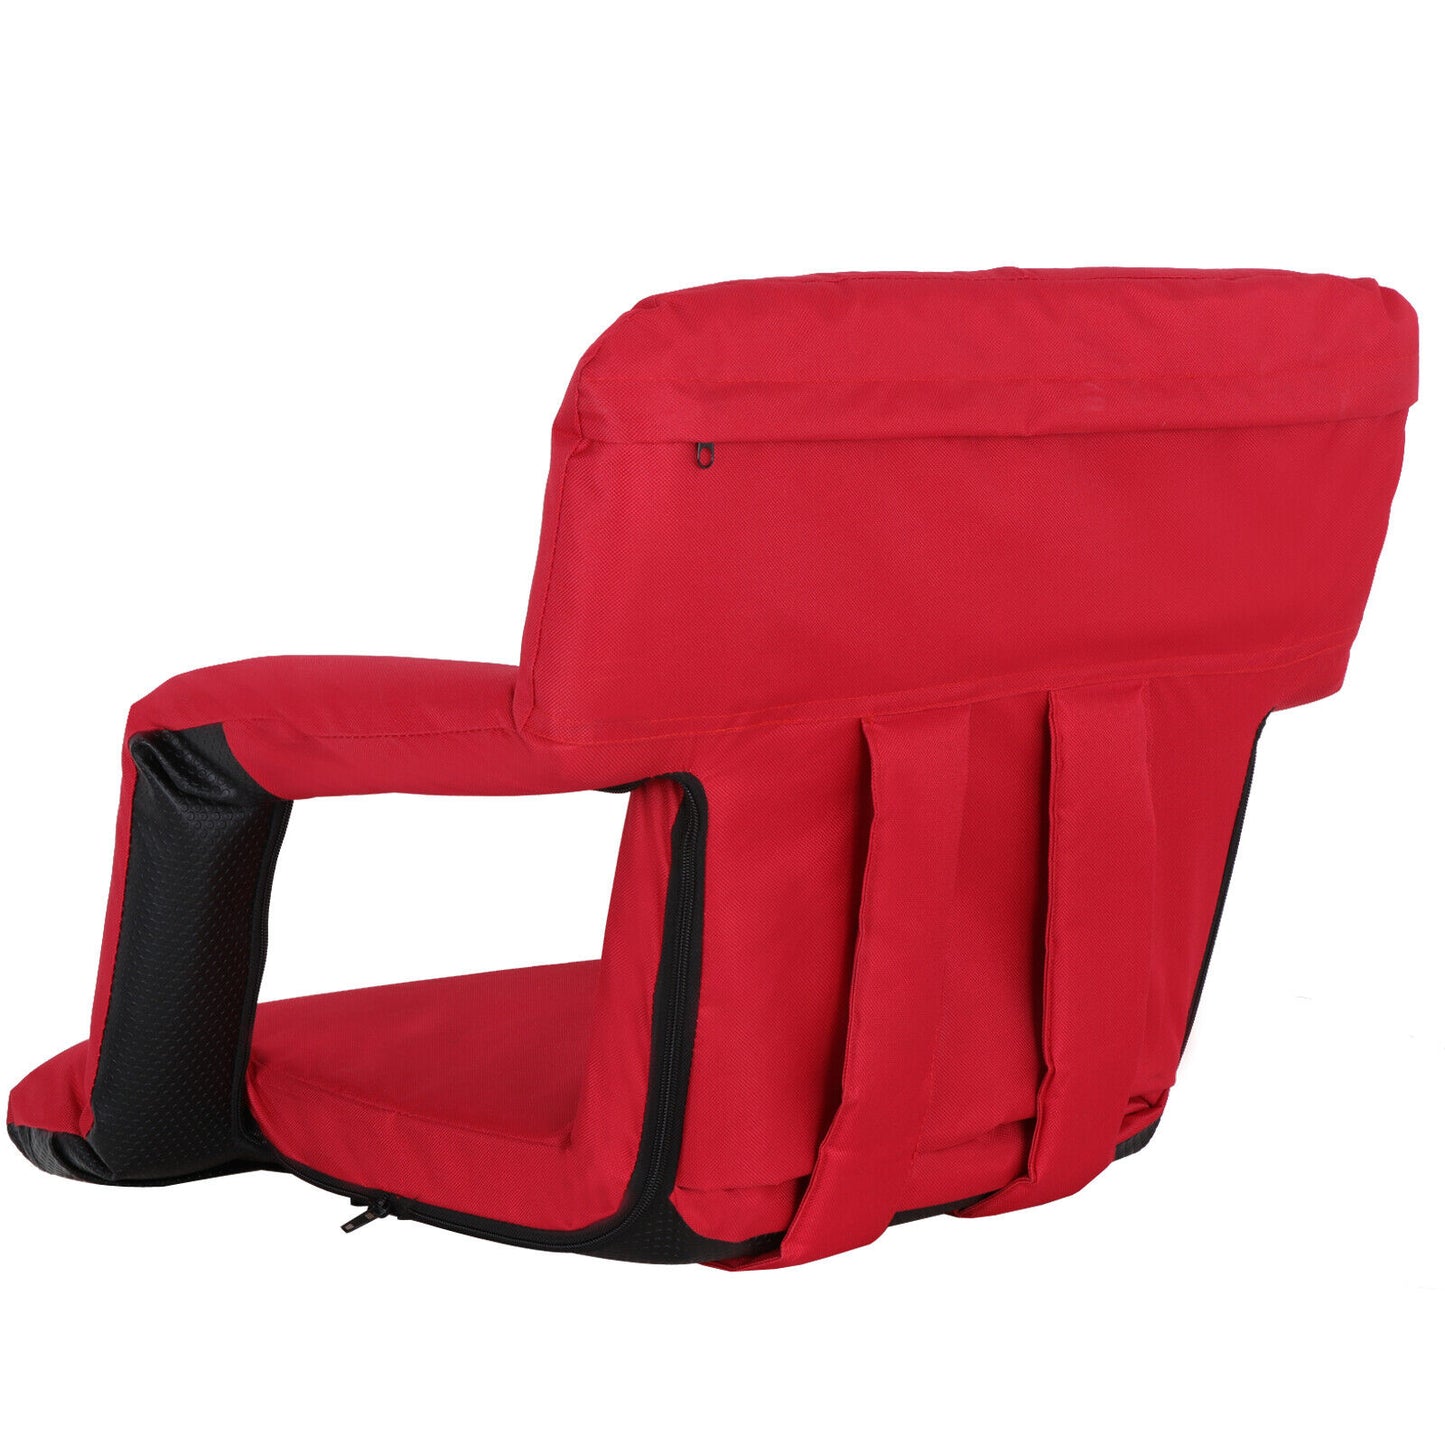 Red Wide Stadium Seats Chairs for Bleachers Benches W/Back 5 Reclining Positions